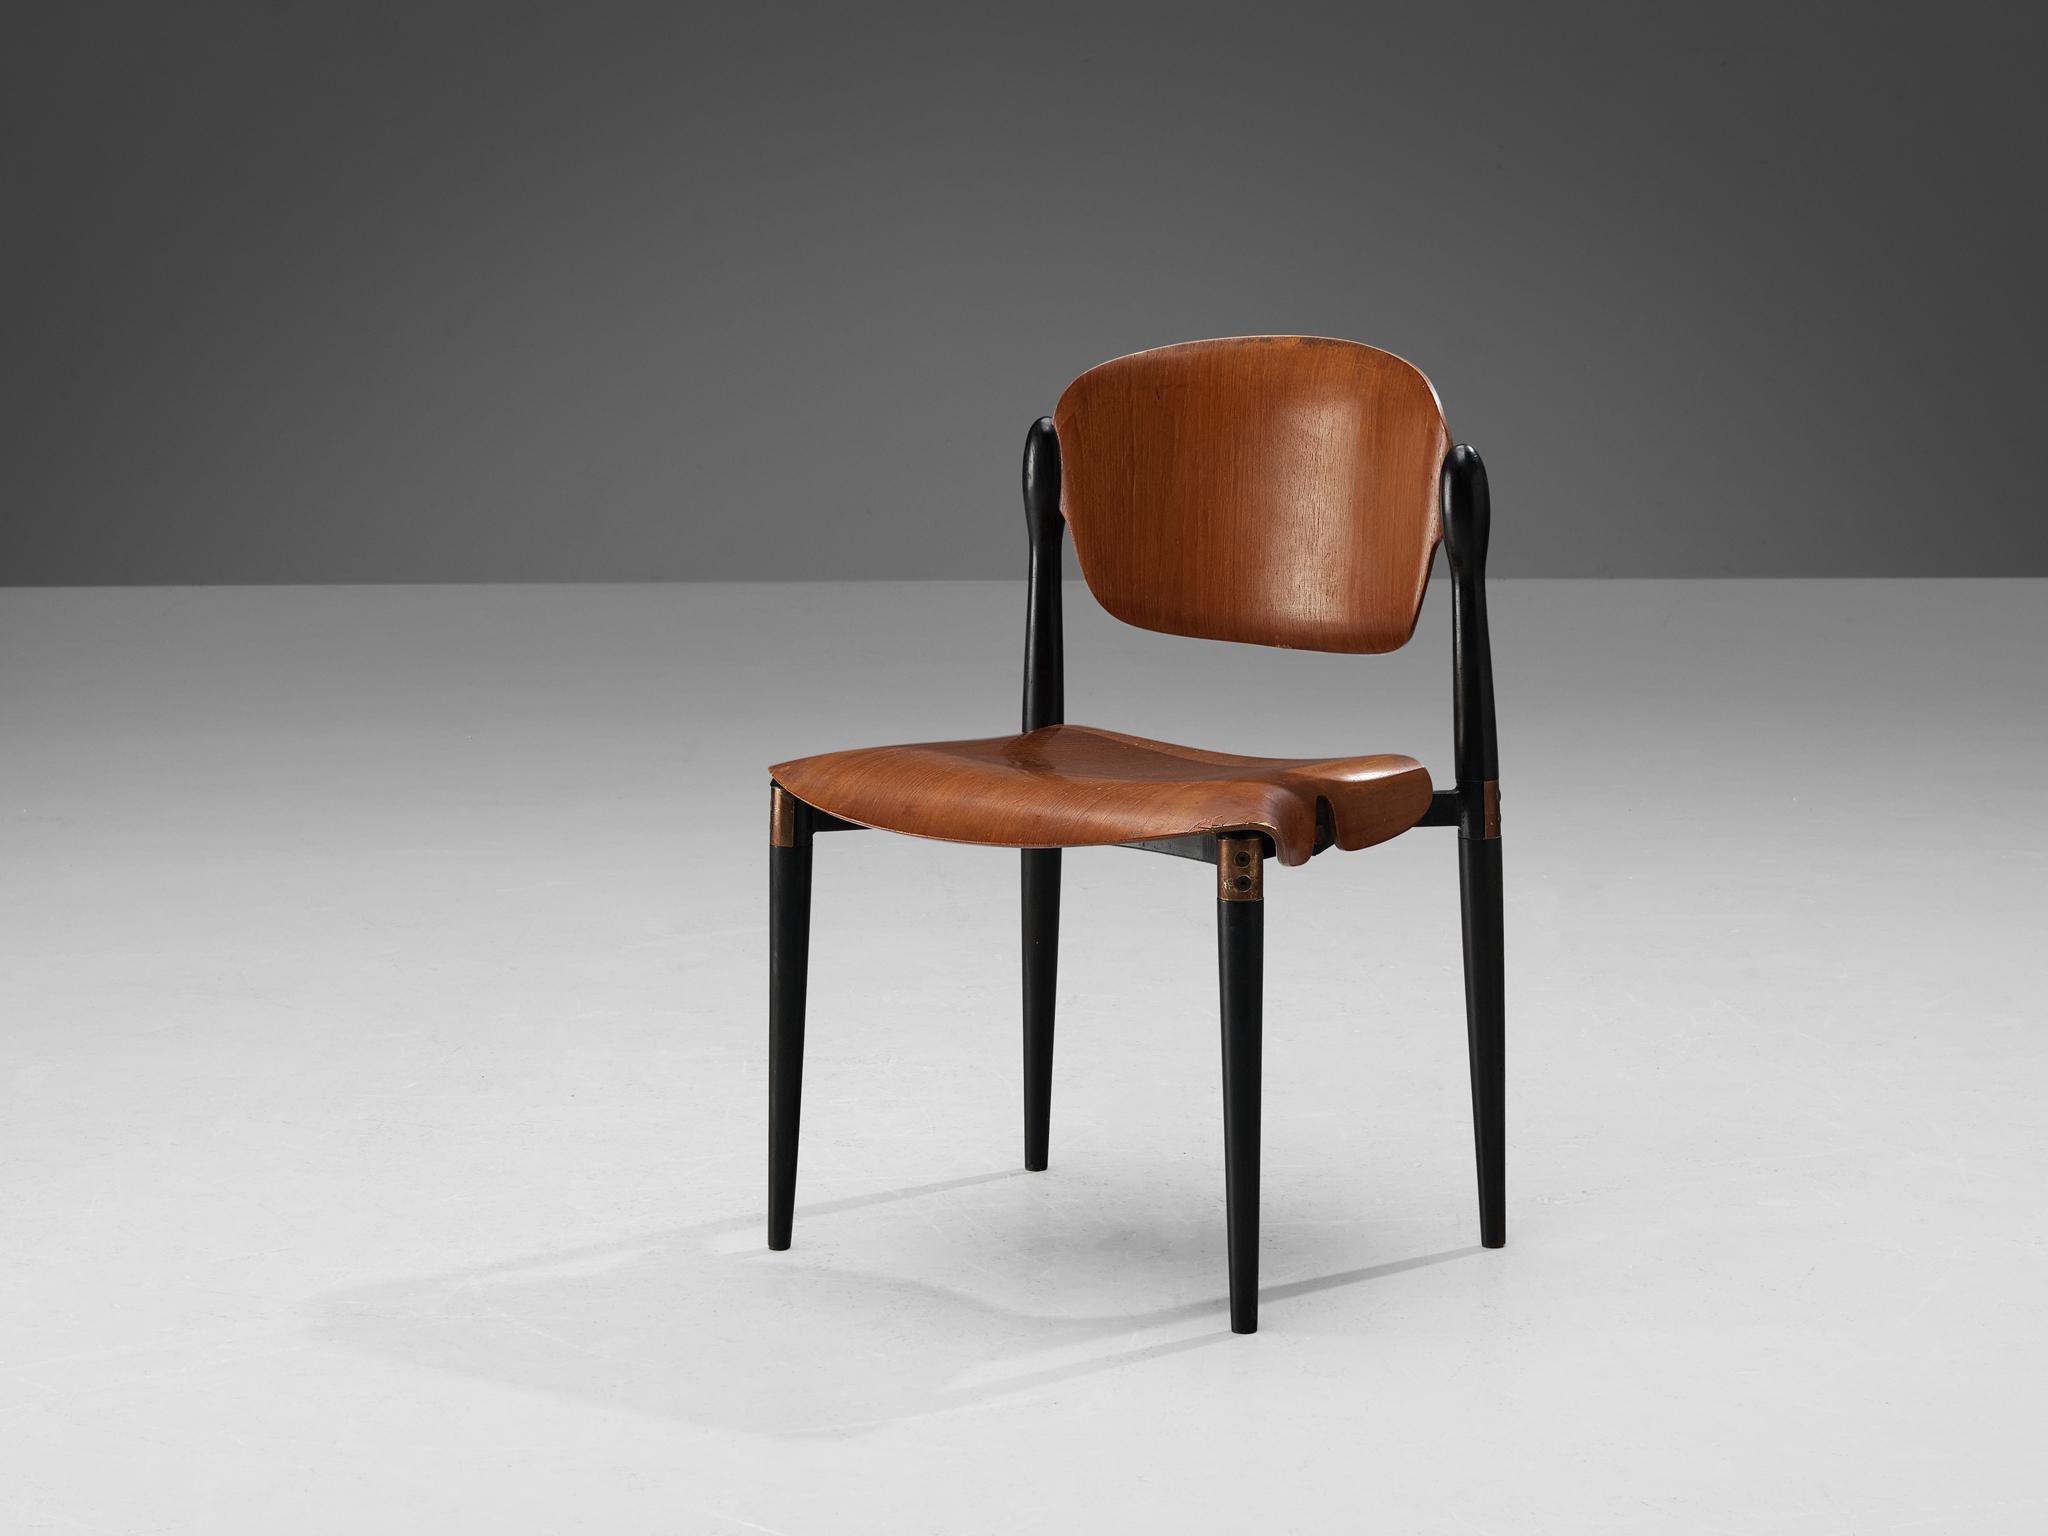 Eugenio Gerli for Tecno, dining chair, model S83, moulded teak plywood, Italy, design and production 1962

A delicate chair model S83 designed and produced by Eugenio Gerli for Tecno in 1962. The backrest and seat are executed in moulded teak